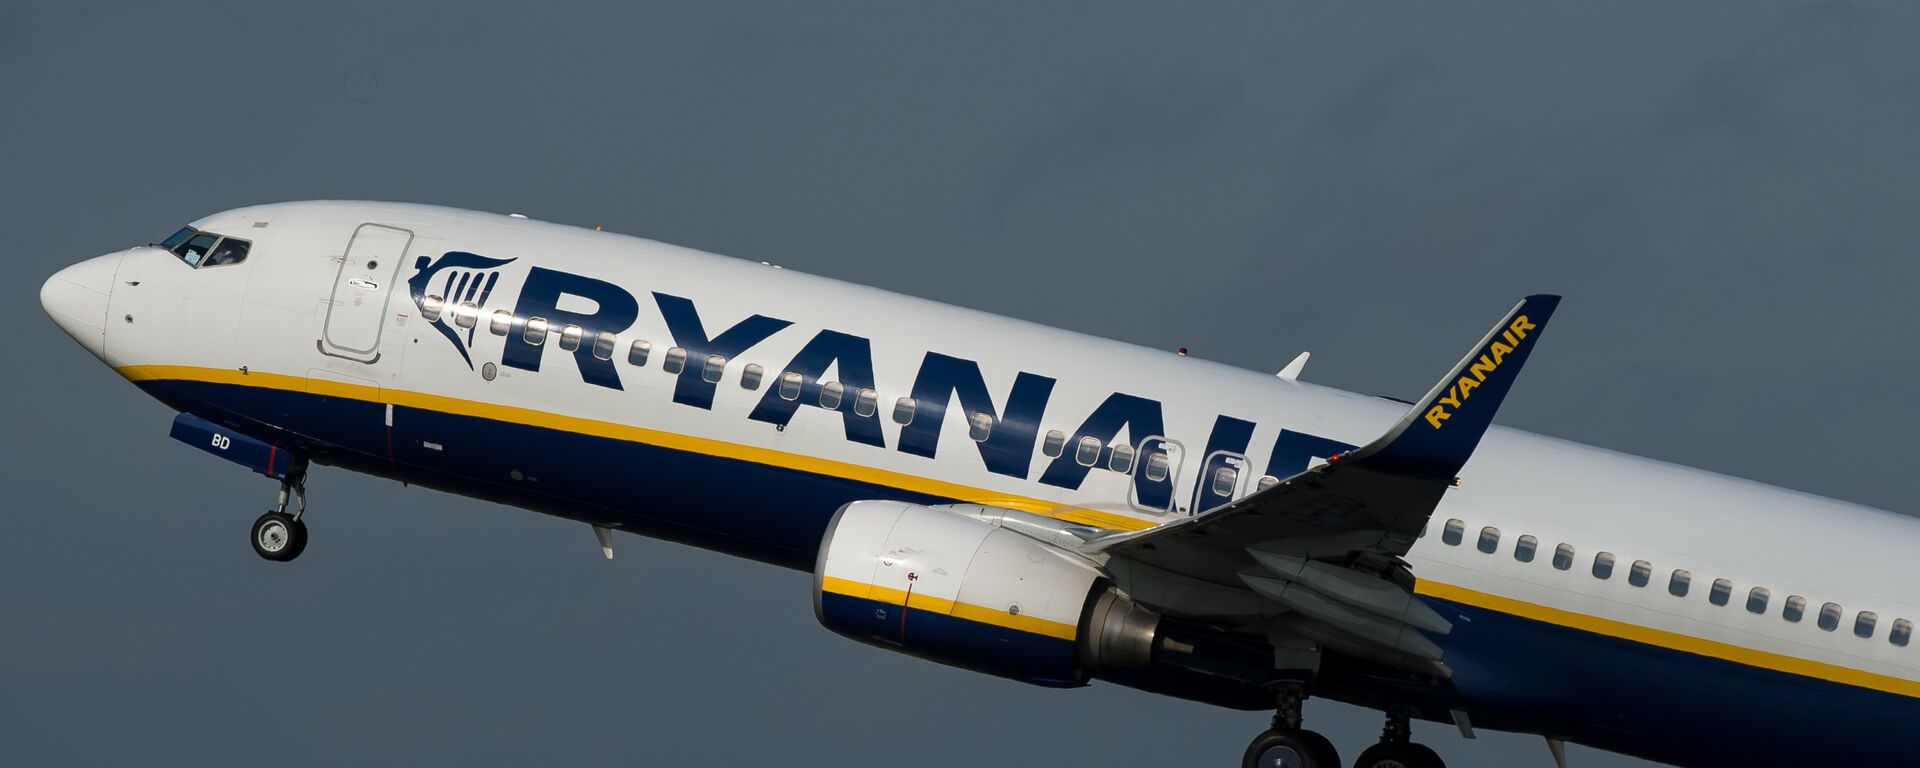 An 737 Boeing plane of the Ryanair company takes off, on October 11, 2014 at the Lille-Lesquin airport, northern France. - Sputnik Mundo, 1920, 25.05.2021